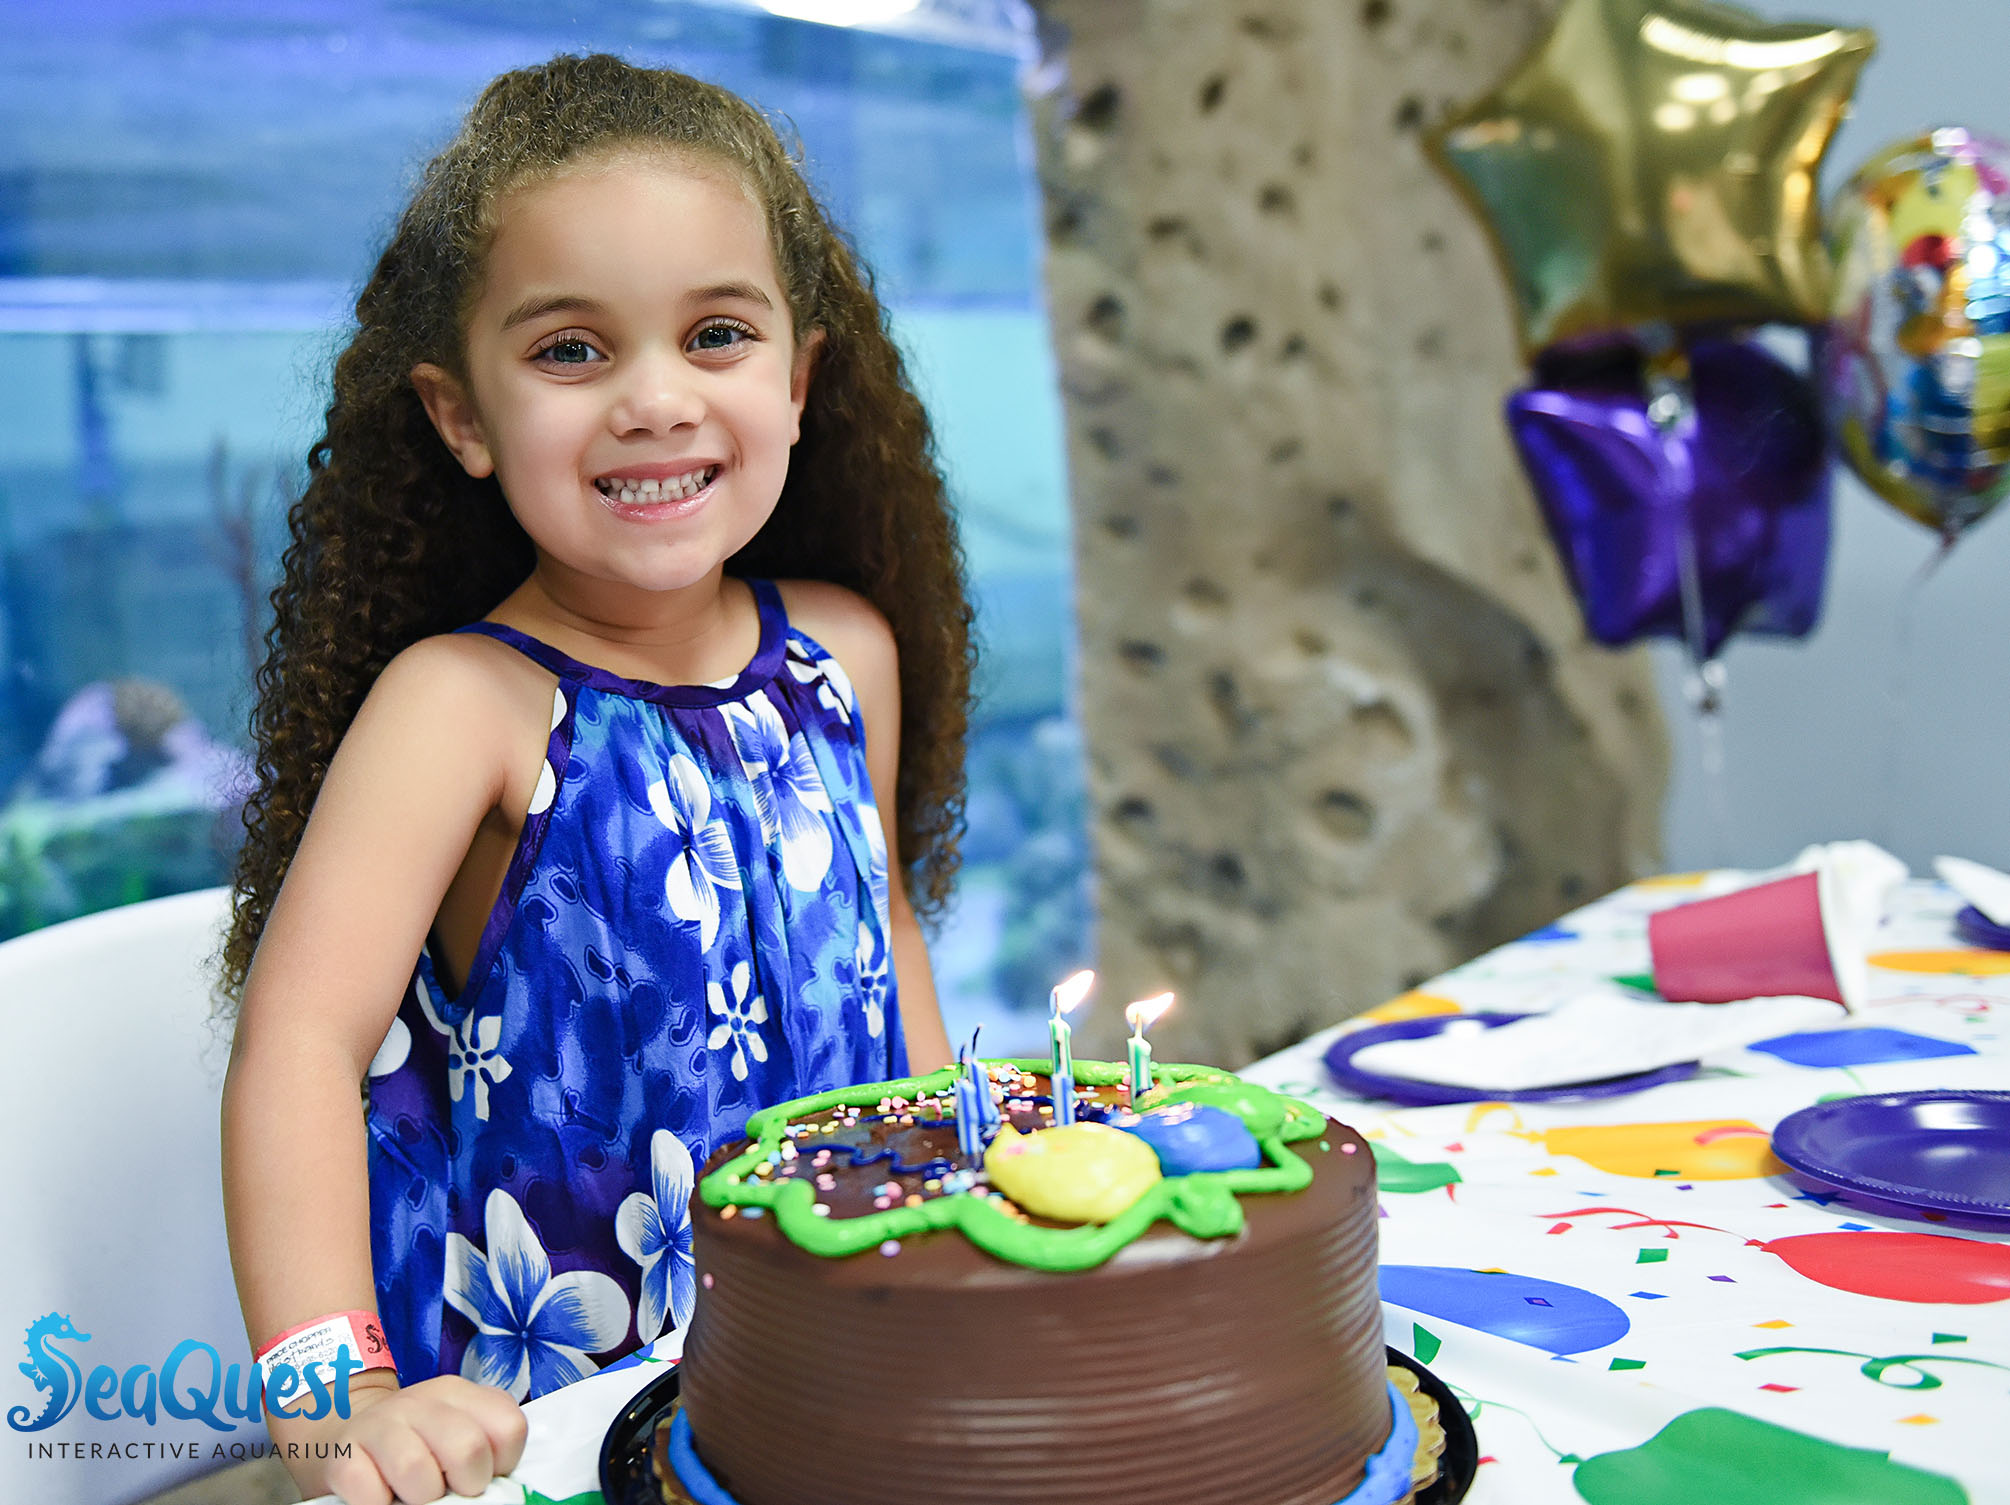 Celebrate your birthday at SeaQuest!